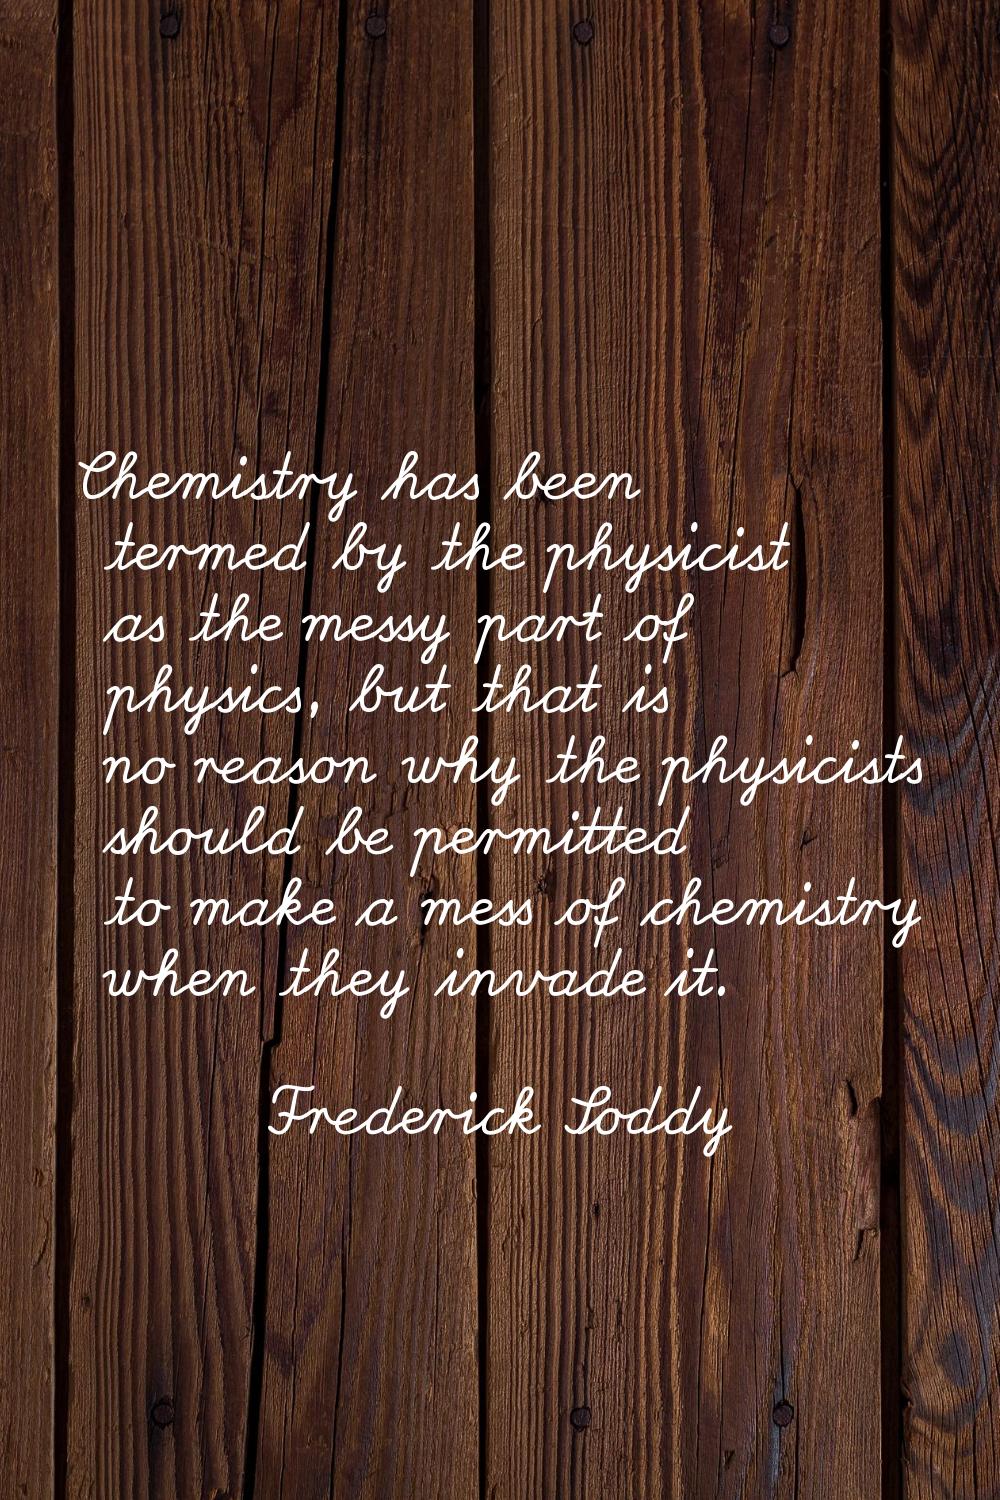 Chemistry has been termed by the physicist as the messy part of physics, but that is no reason why 